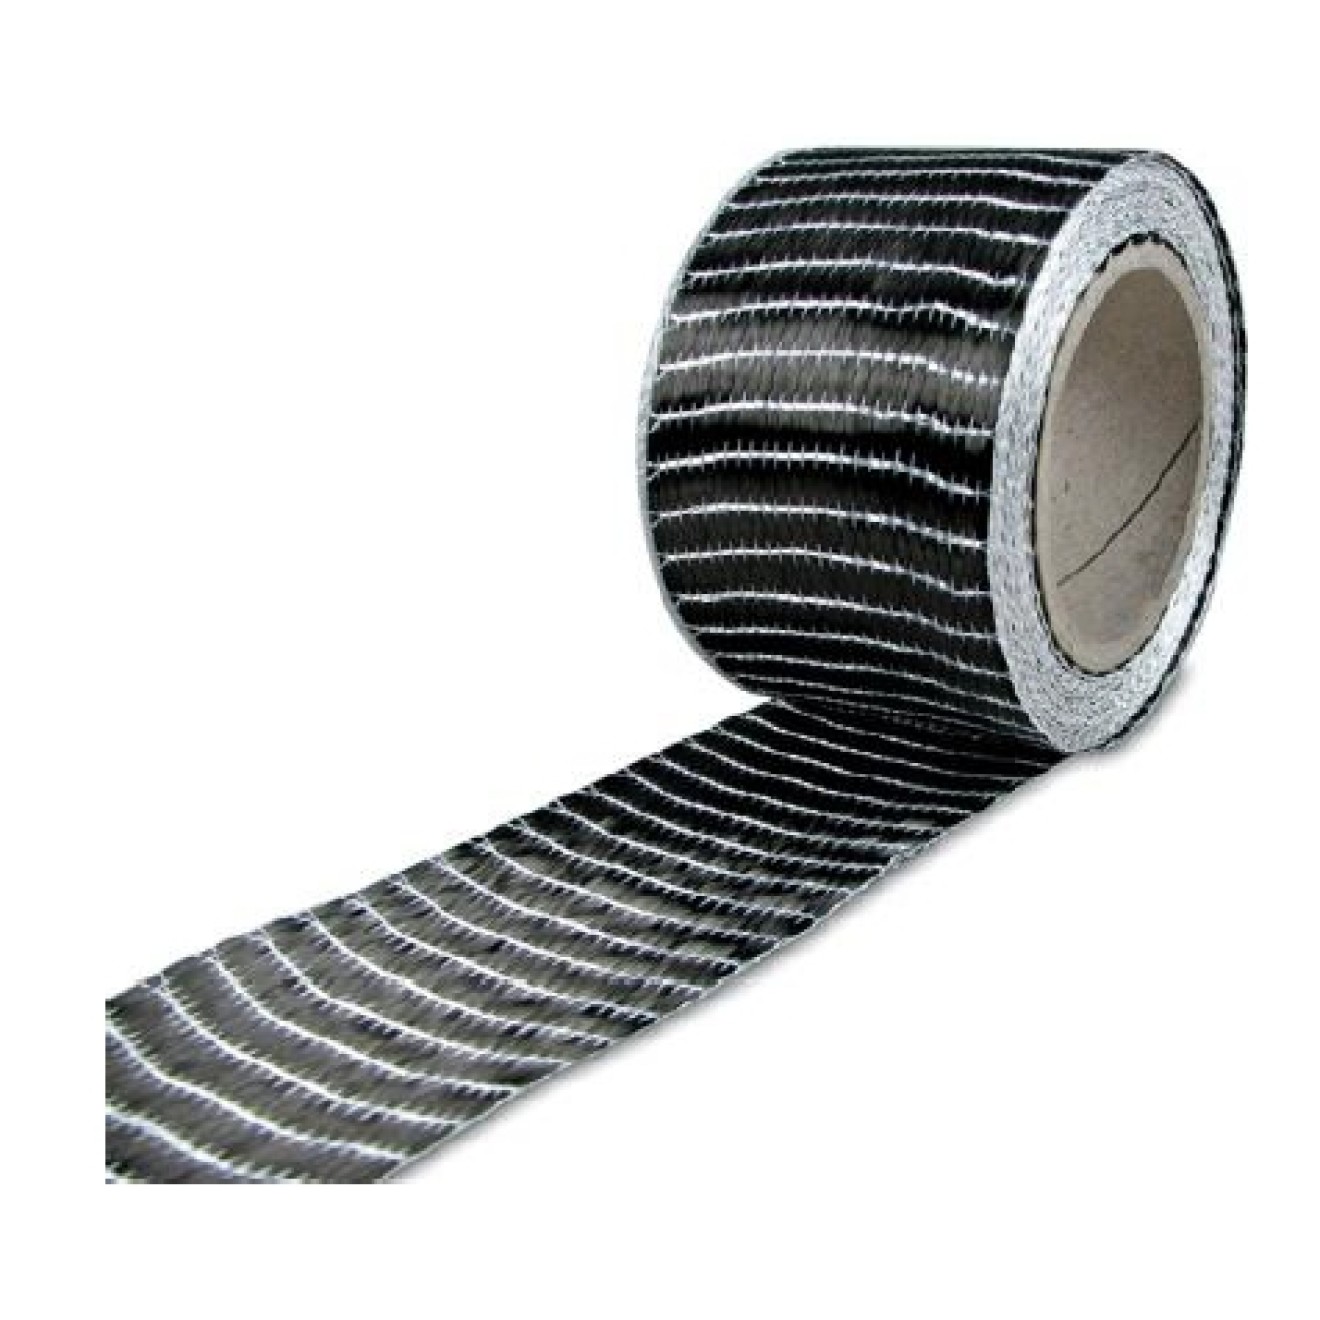 Woven Carbon-UD 250g/m² width 50mm unidirectional